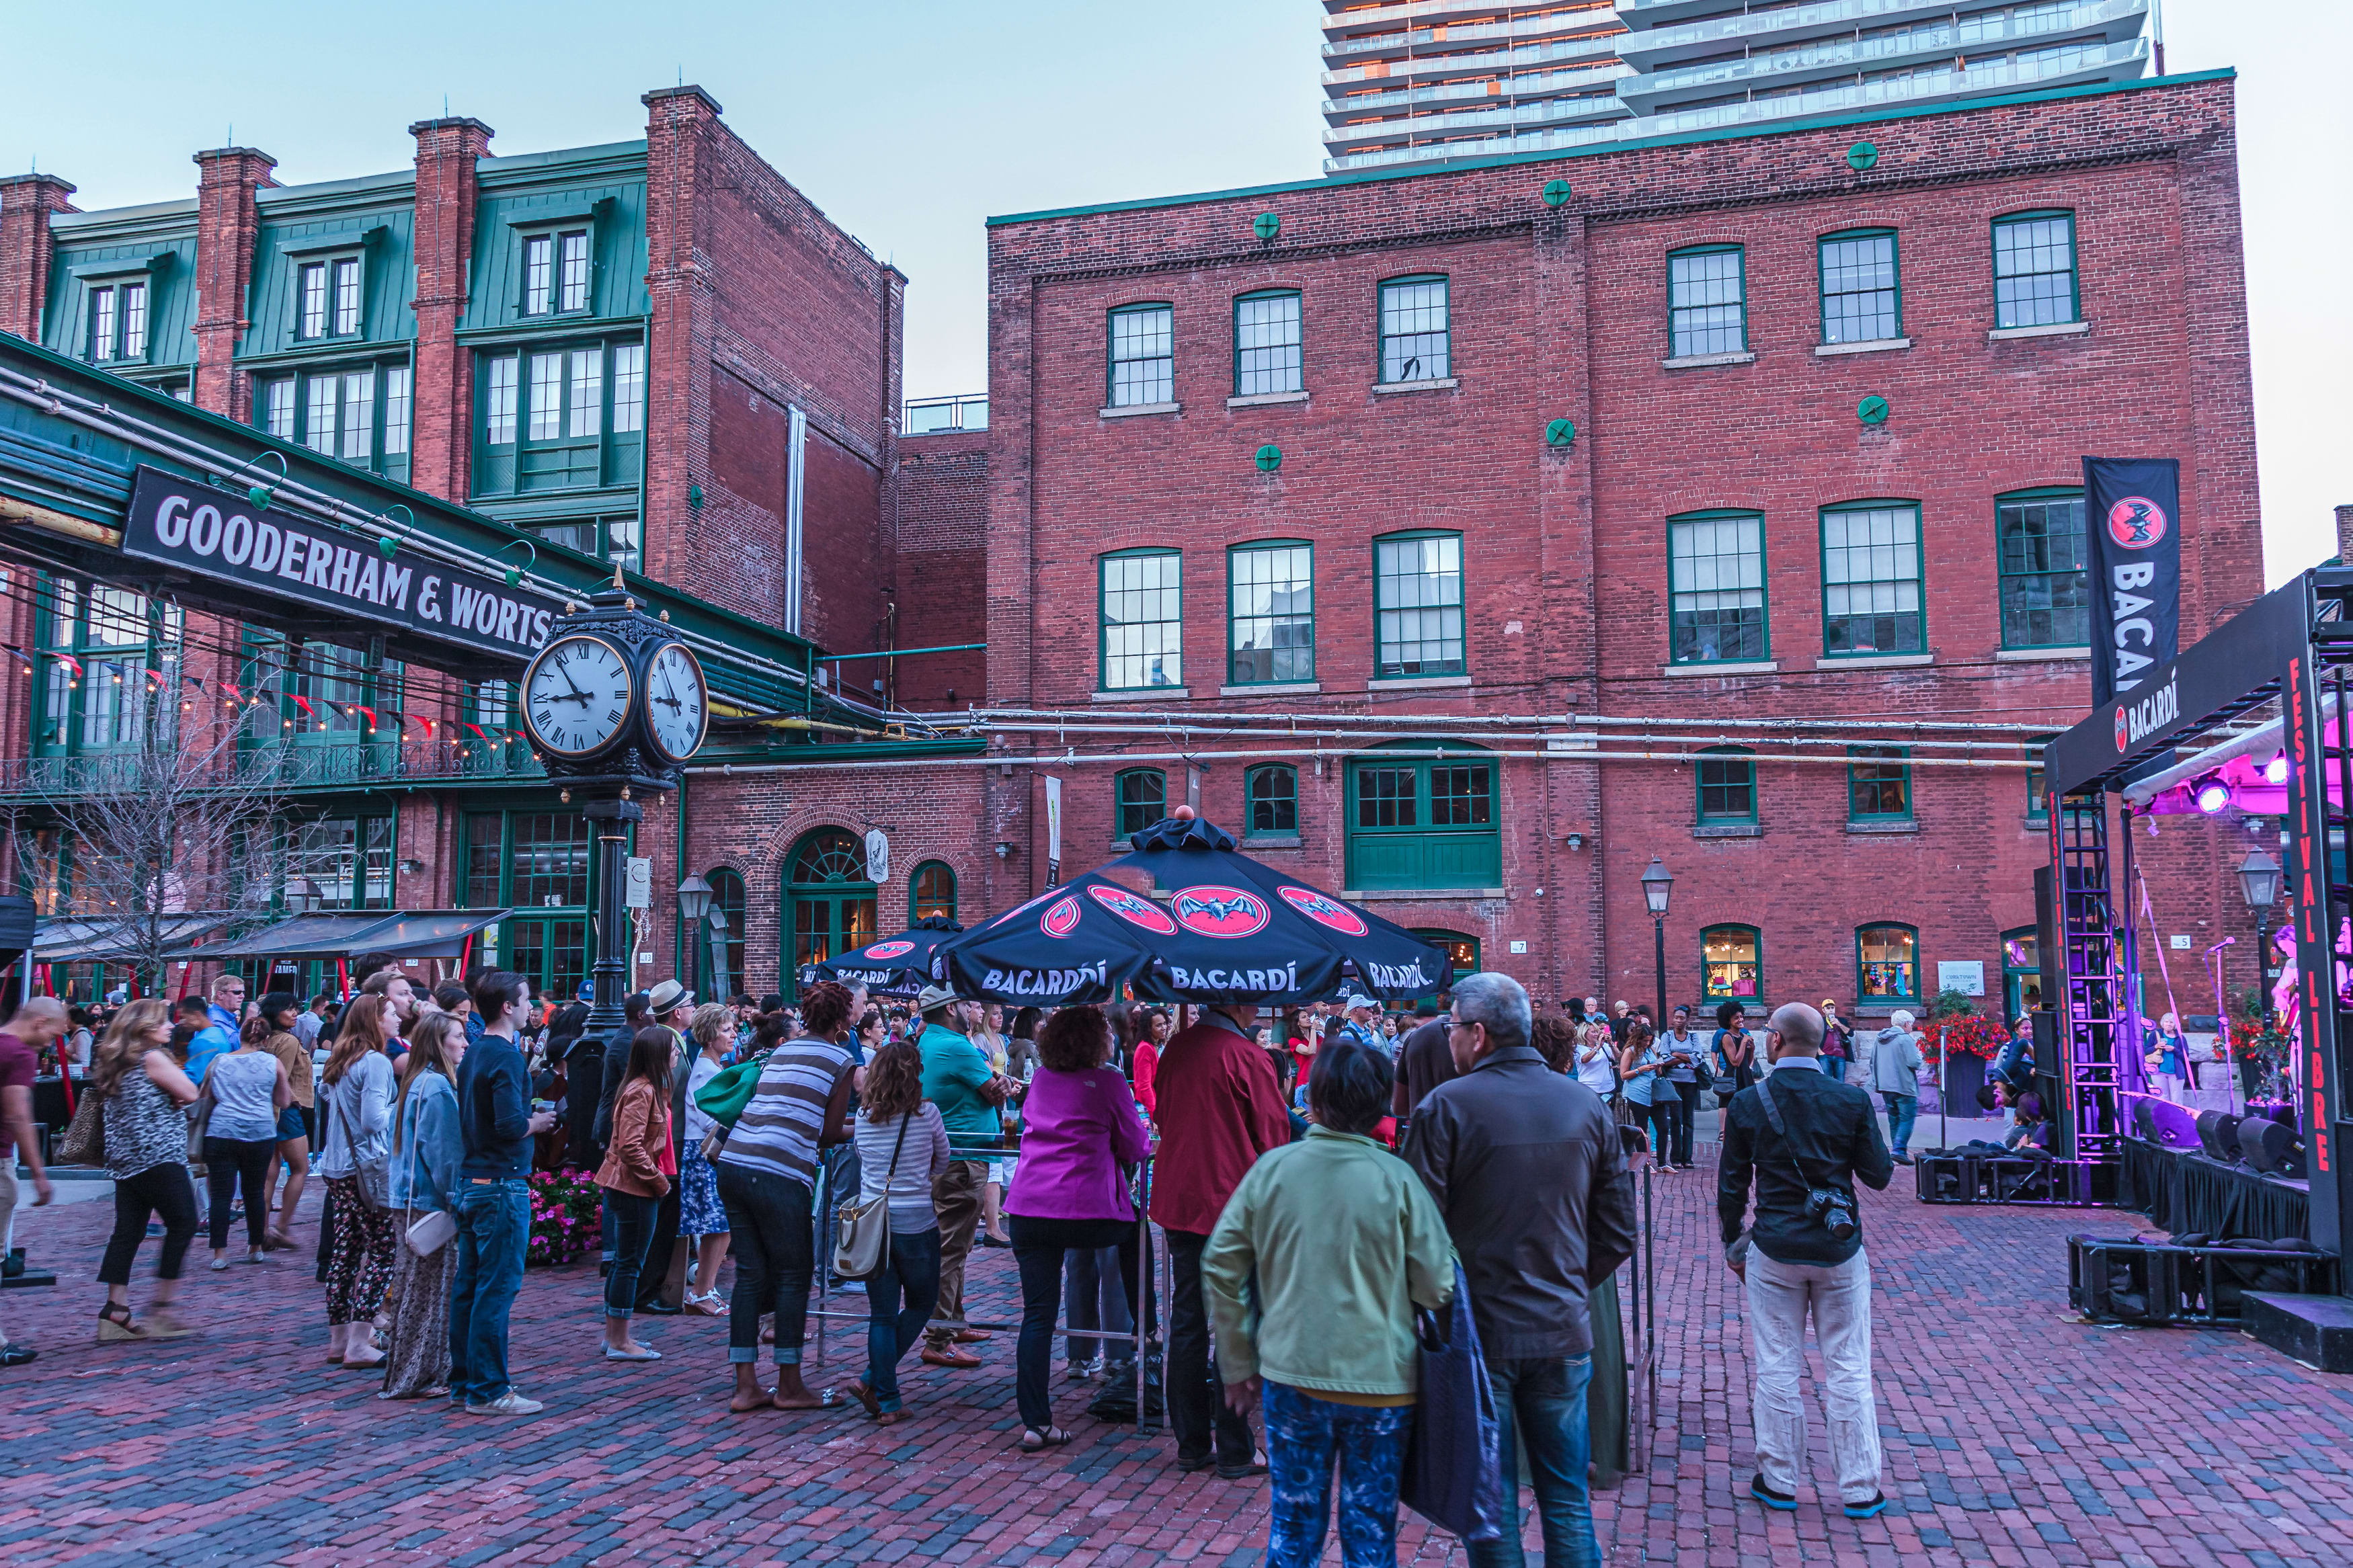 Toronto's Distillery District with crowds exploring around red brick buildings.